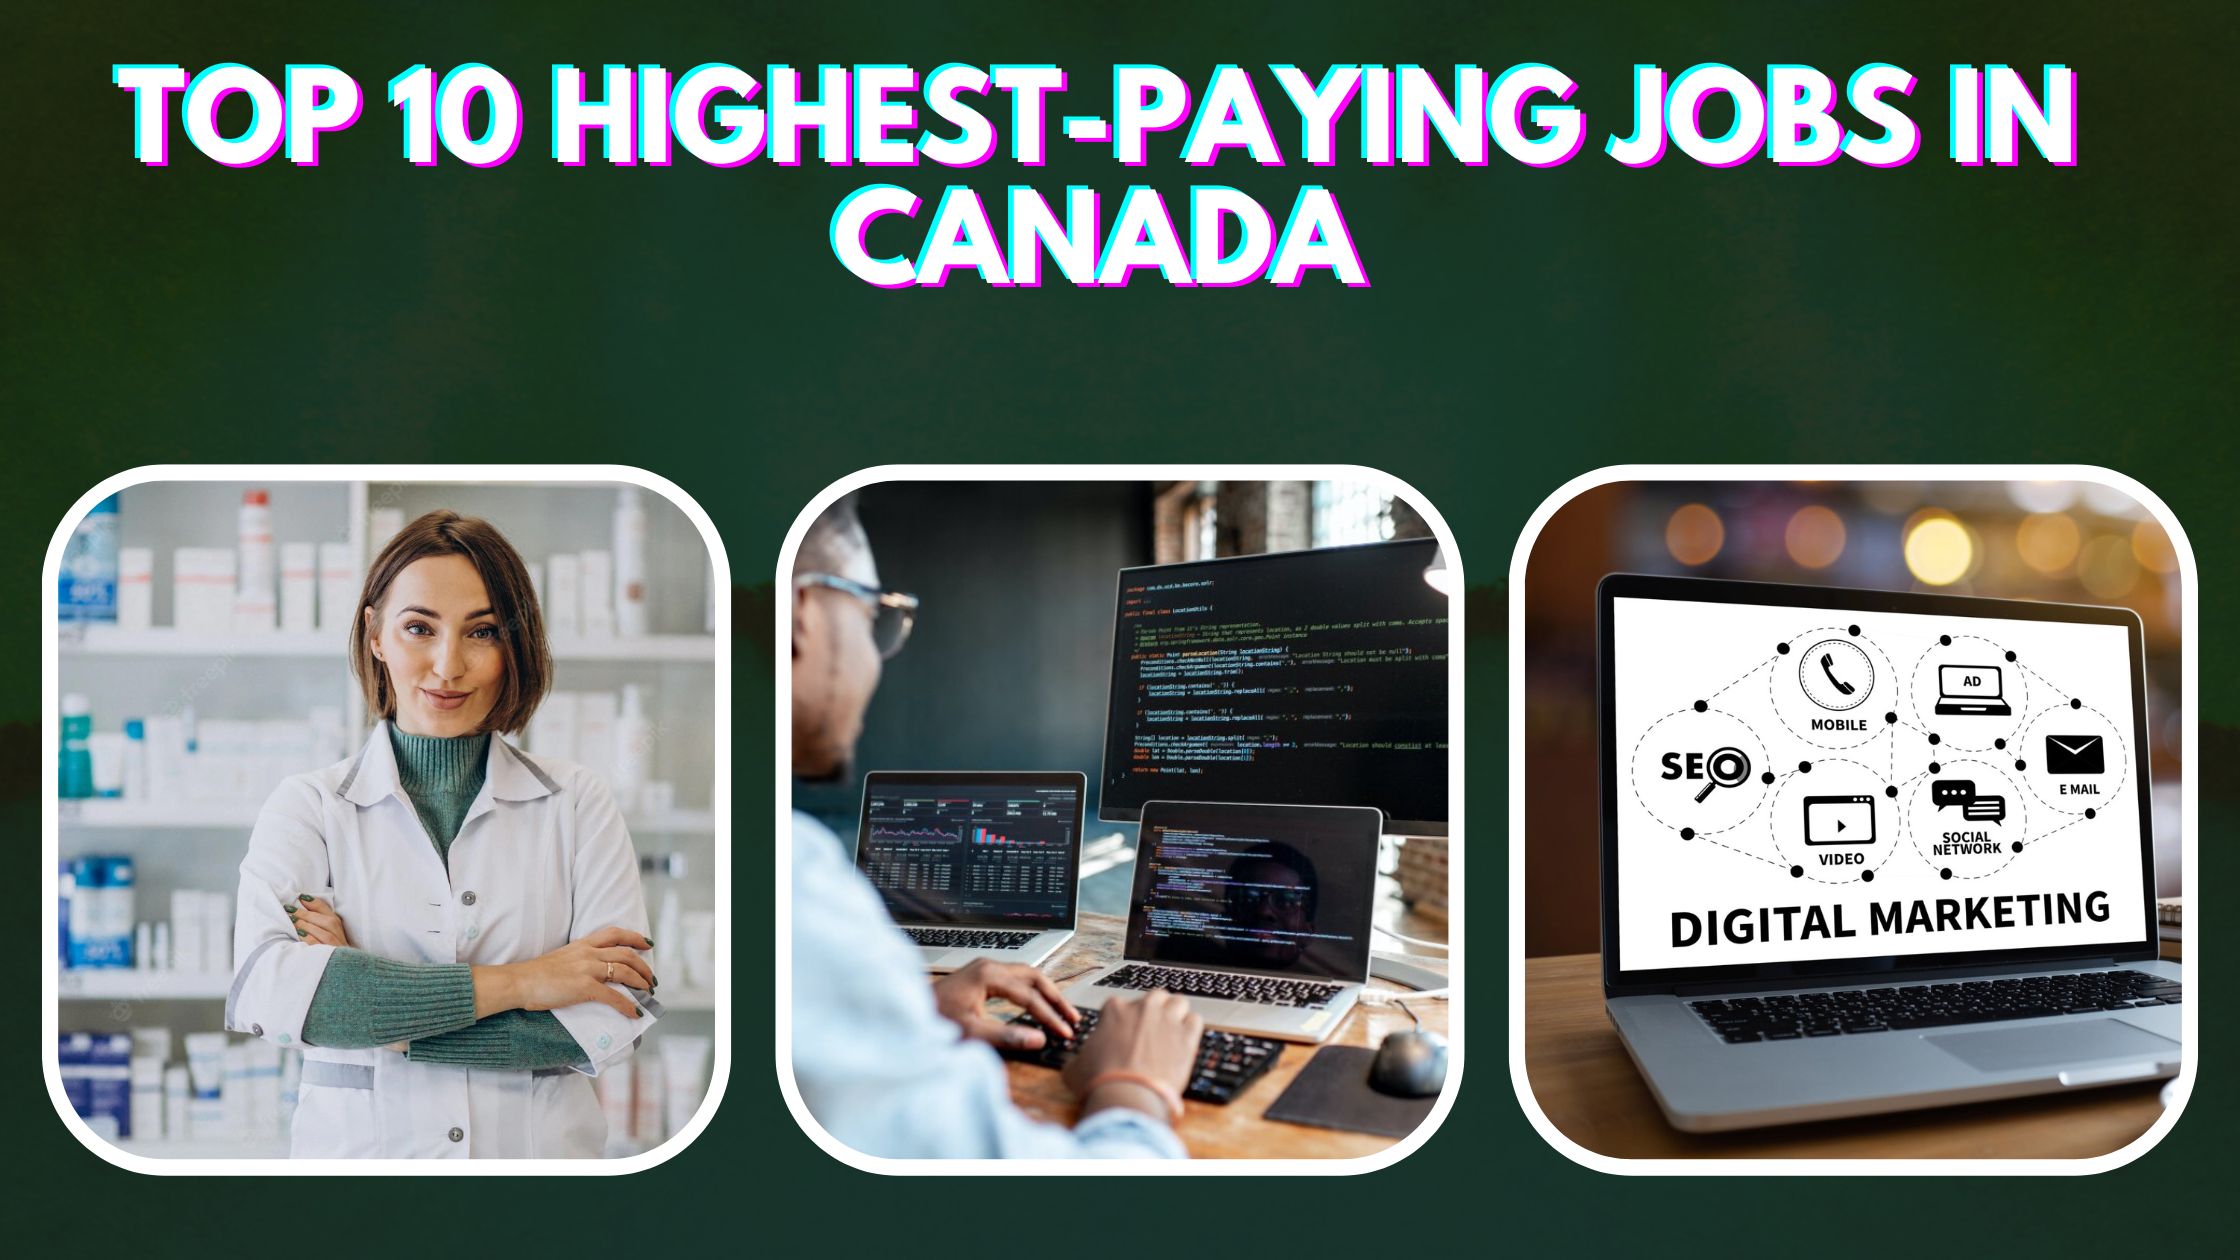 Top 10 Highest-paying Jobs in Canada